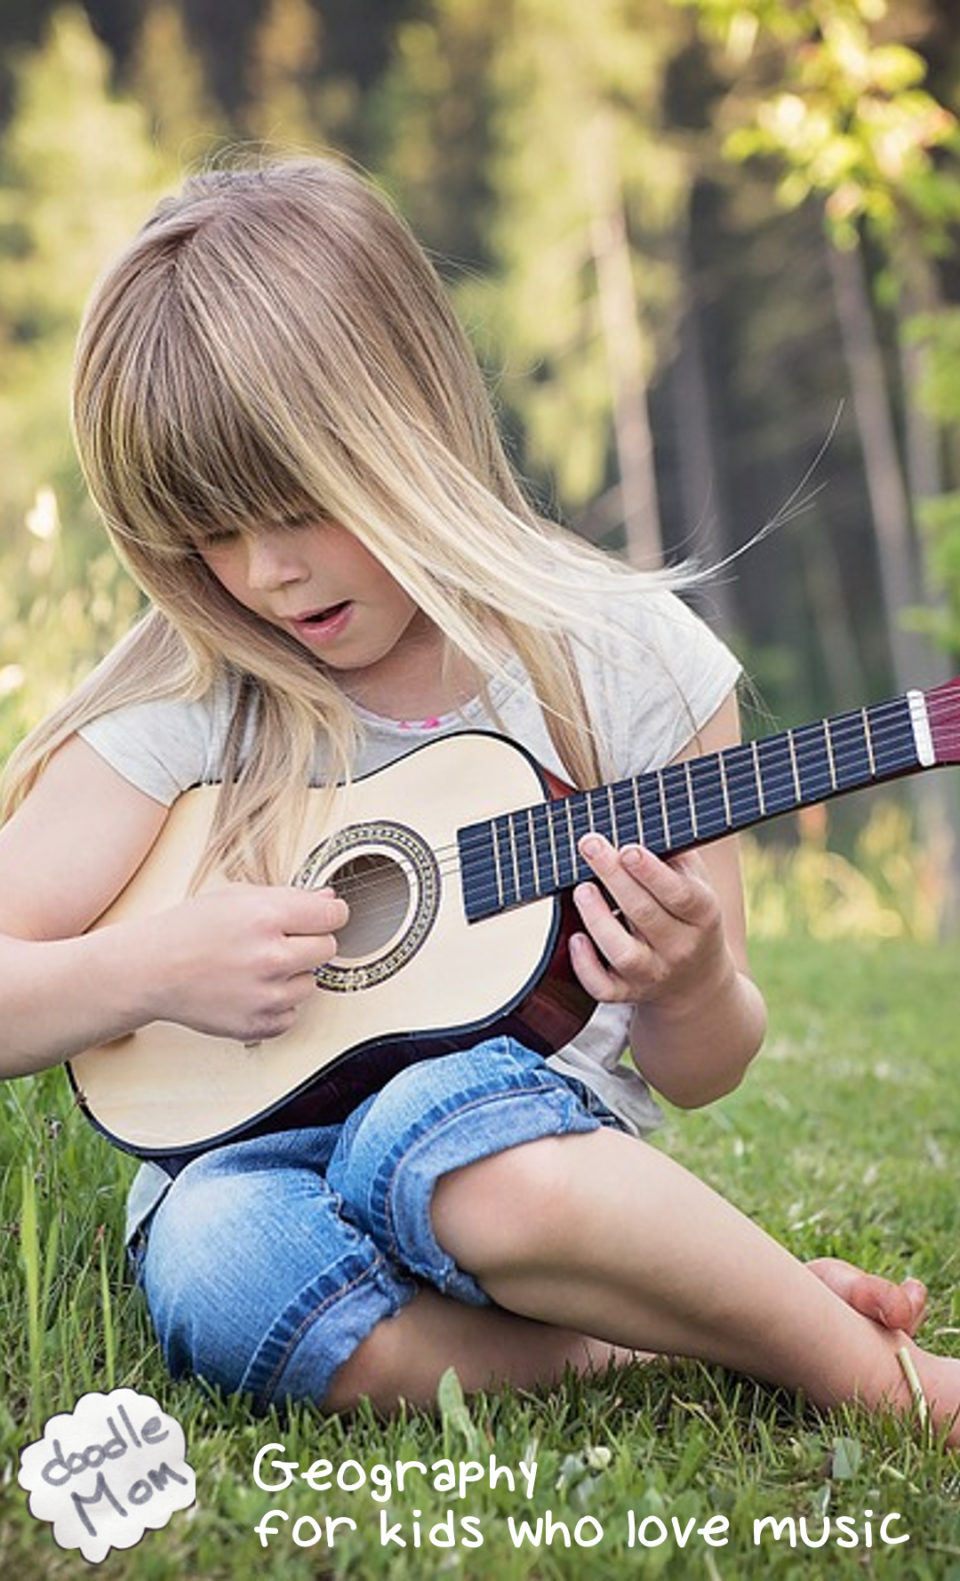 Geography for kids who love music